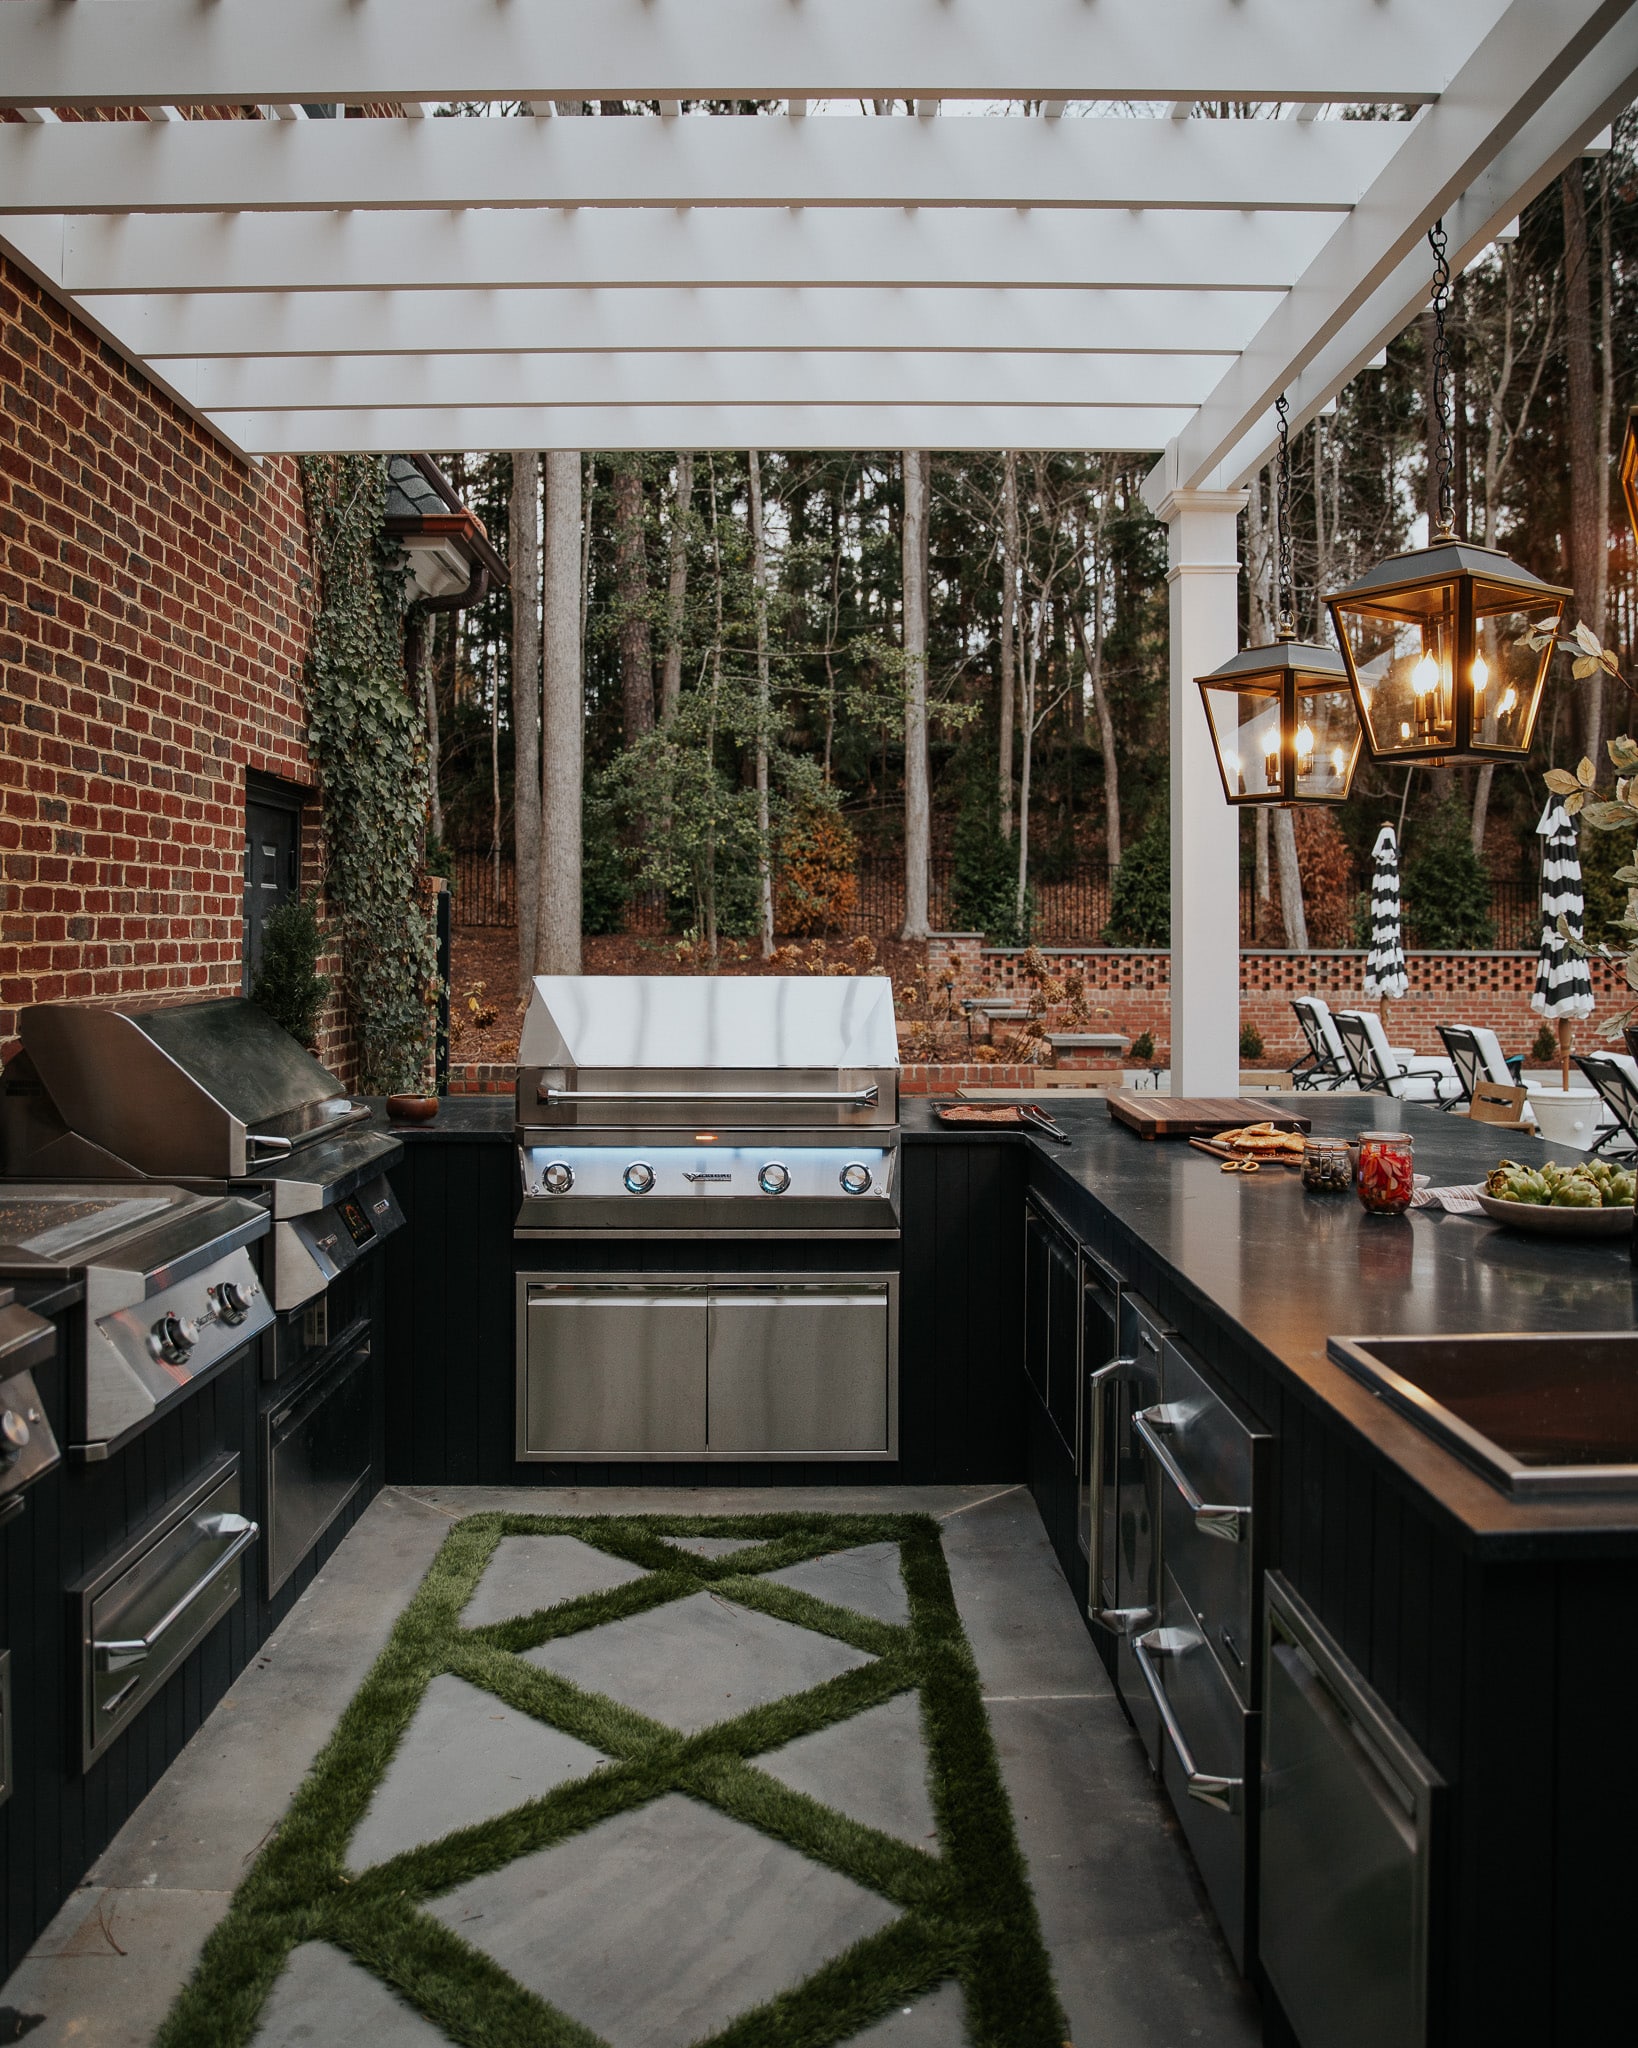 12 Fabulous Kitchen Designs With Indoor Built In Grill  Outdoor kitchen,  Outdoor kitchen appliances, Built in grill